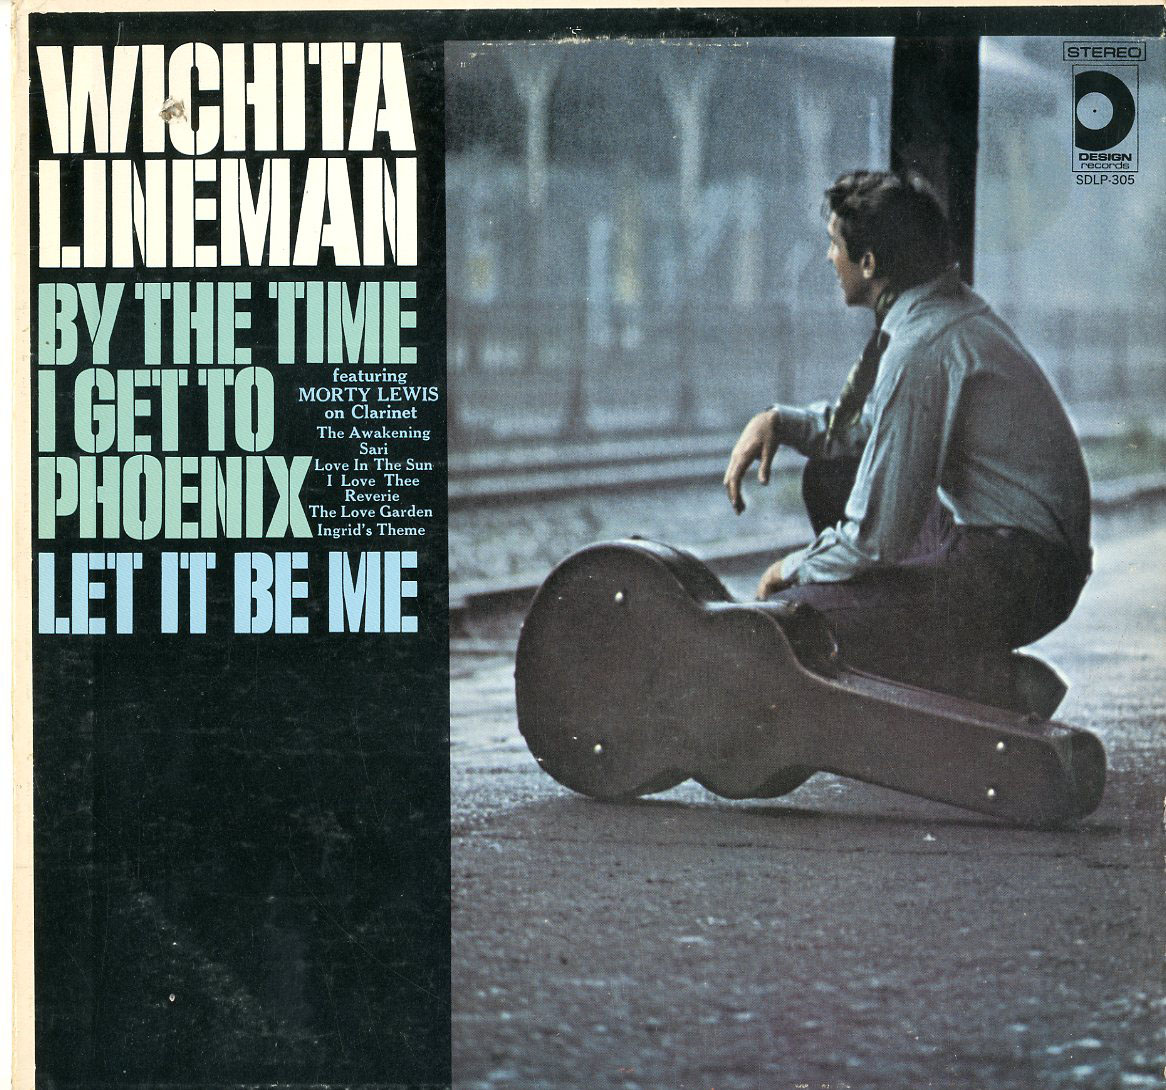 Albumcover Morty Lewis - Wichita Lineman - By The Time I Get To Phoenix - Let It Be Me - Featuring Morty Lewis - Clarinet